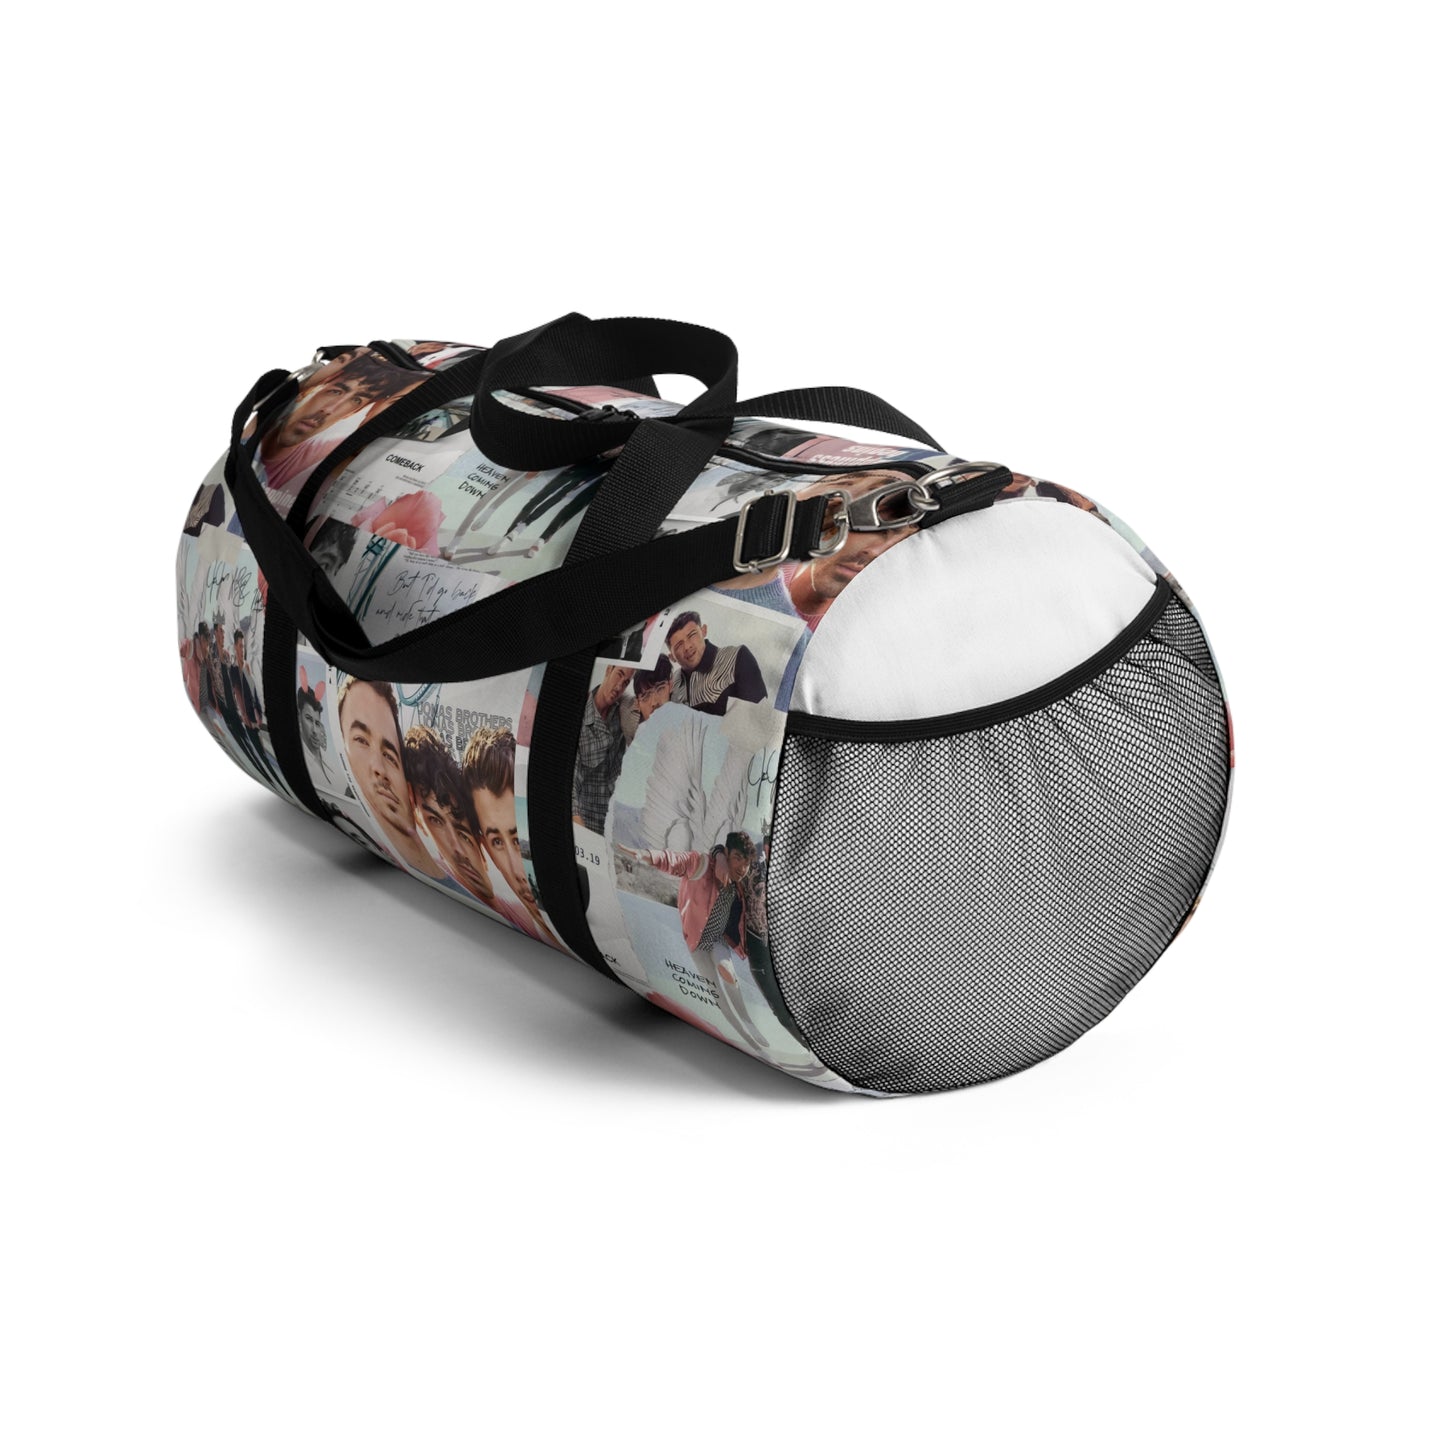 Jonas Brothers Happiness Begins Collage Duffel Bag